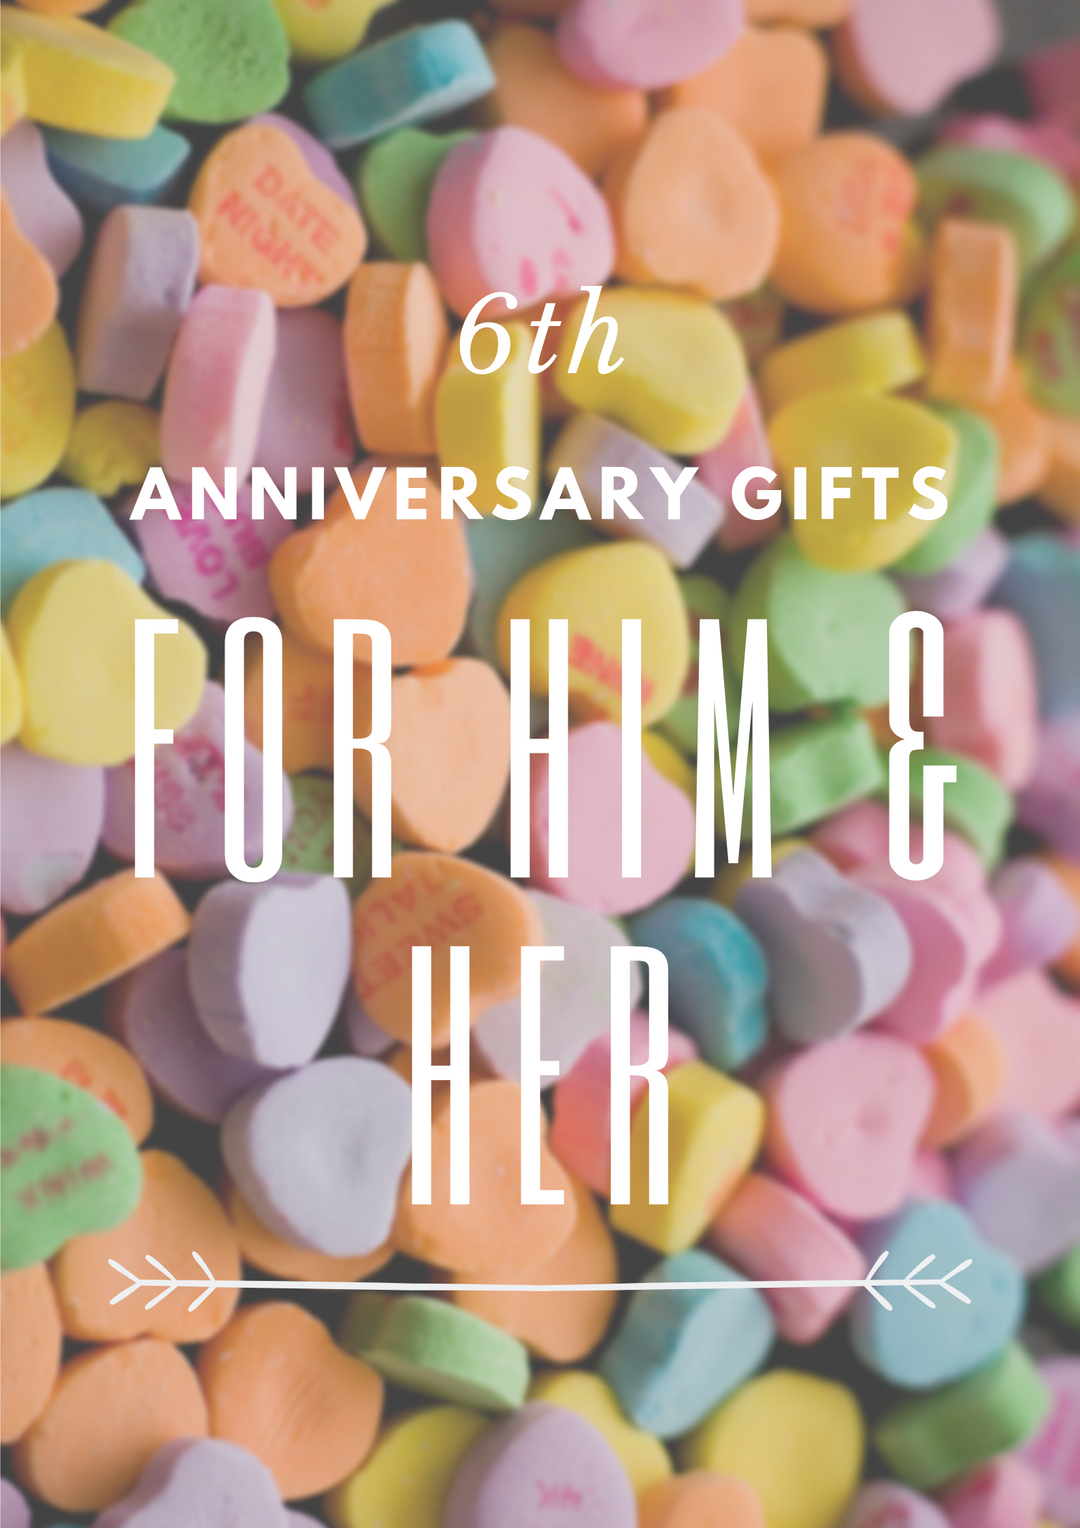 6th Anniversary Gifts for Him and Her